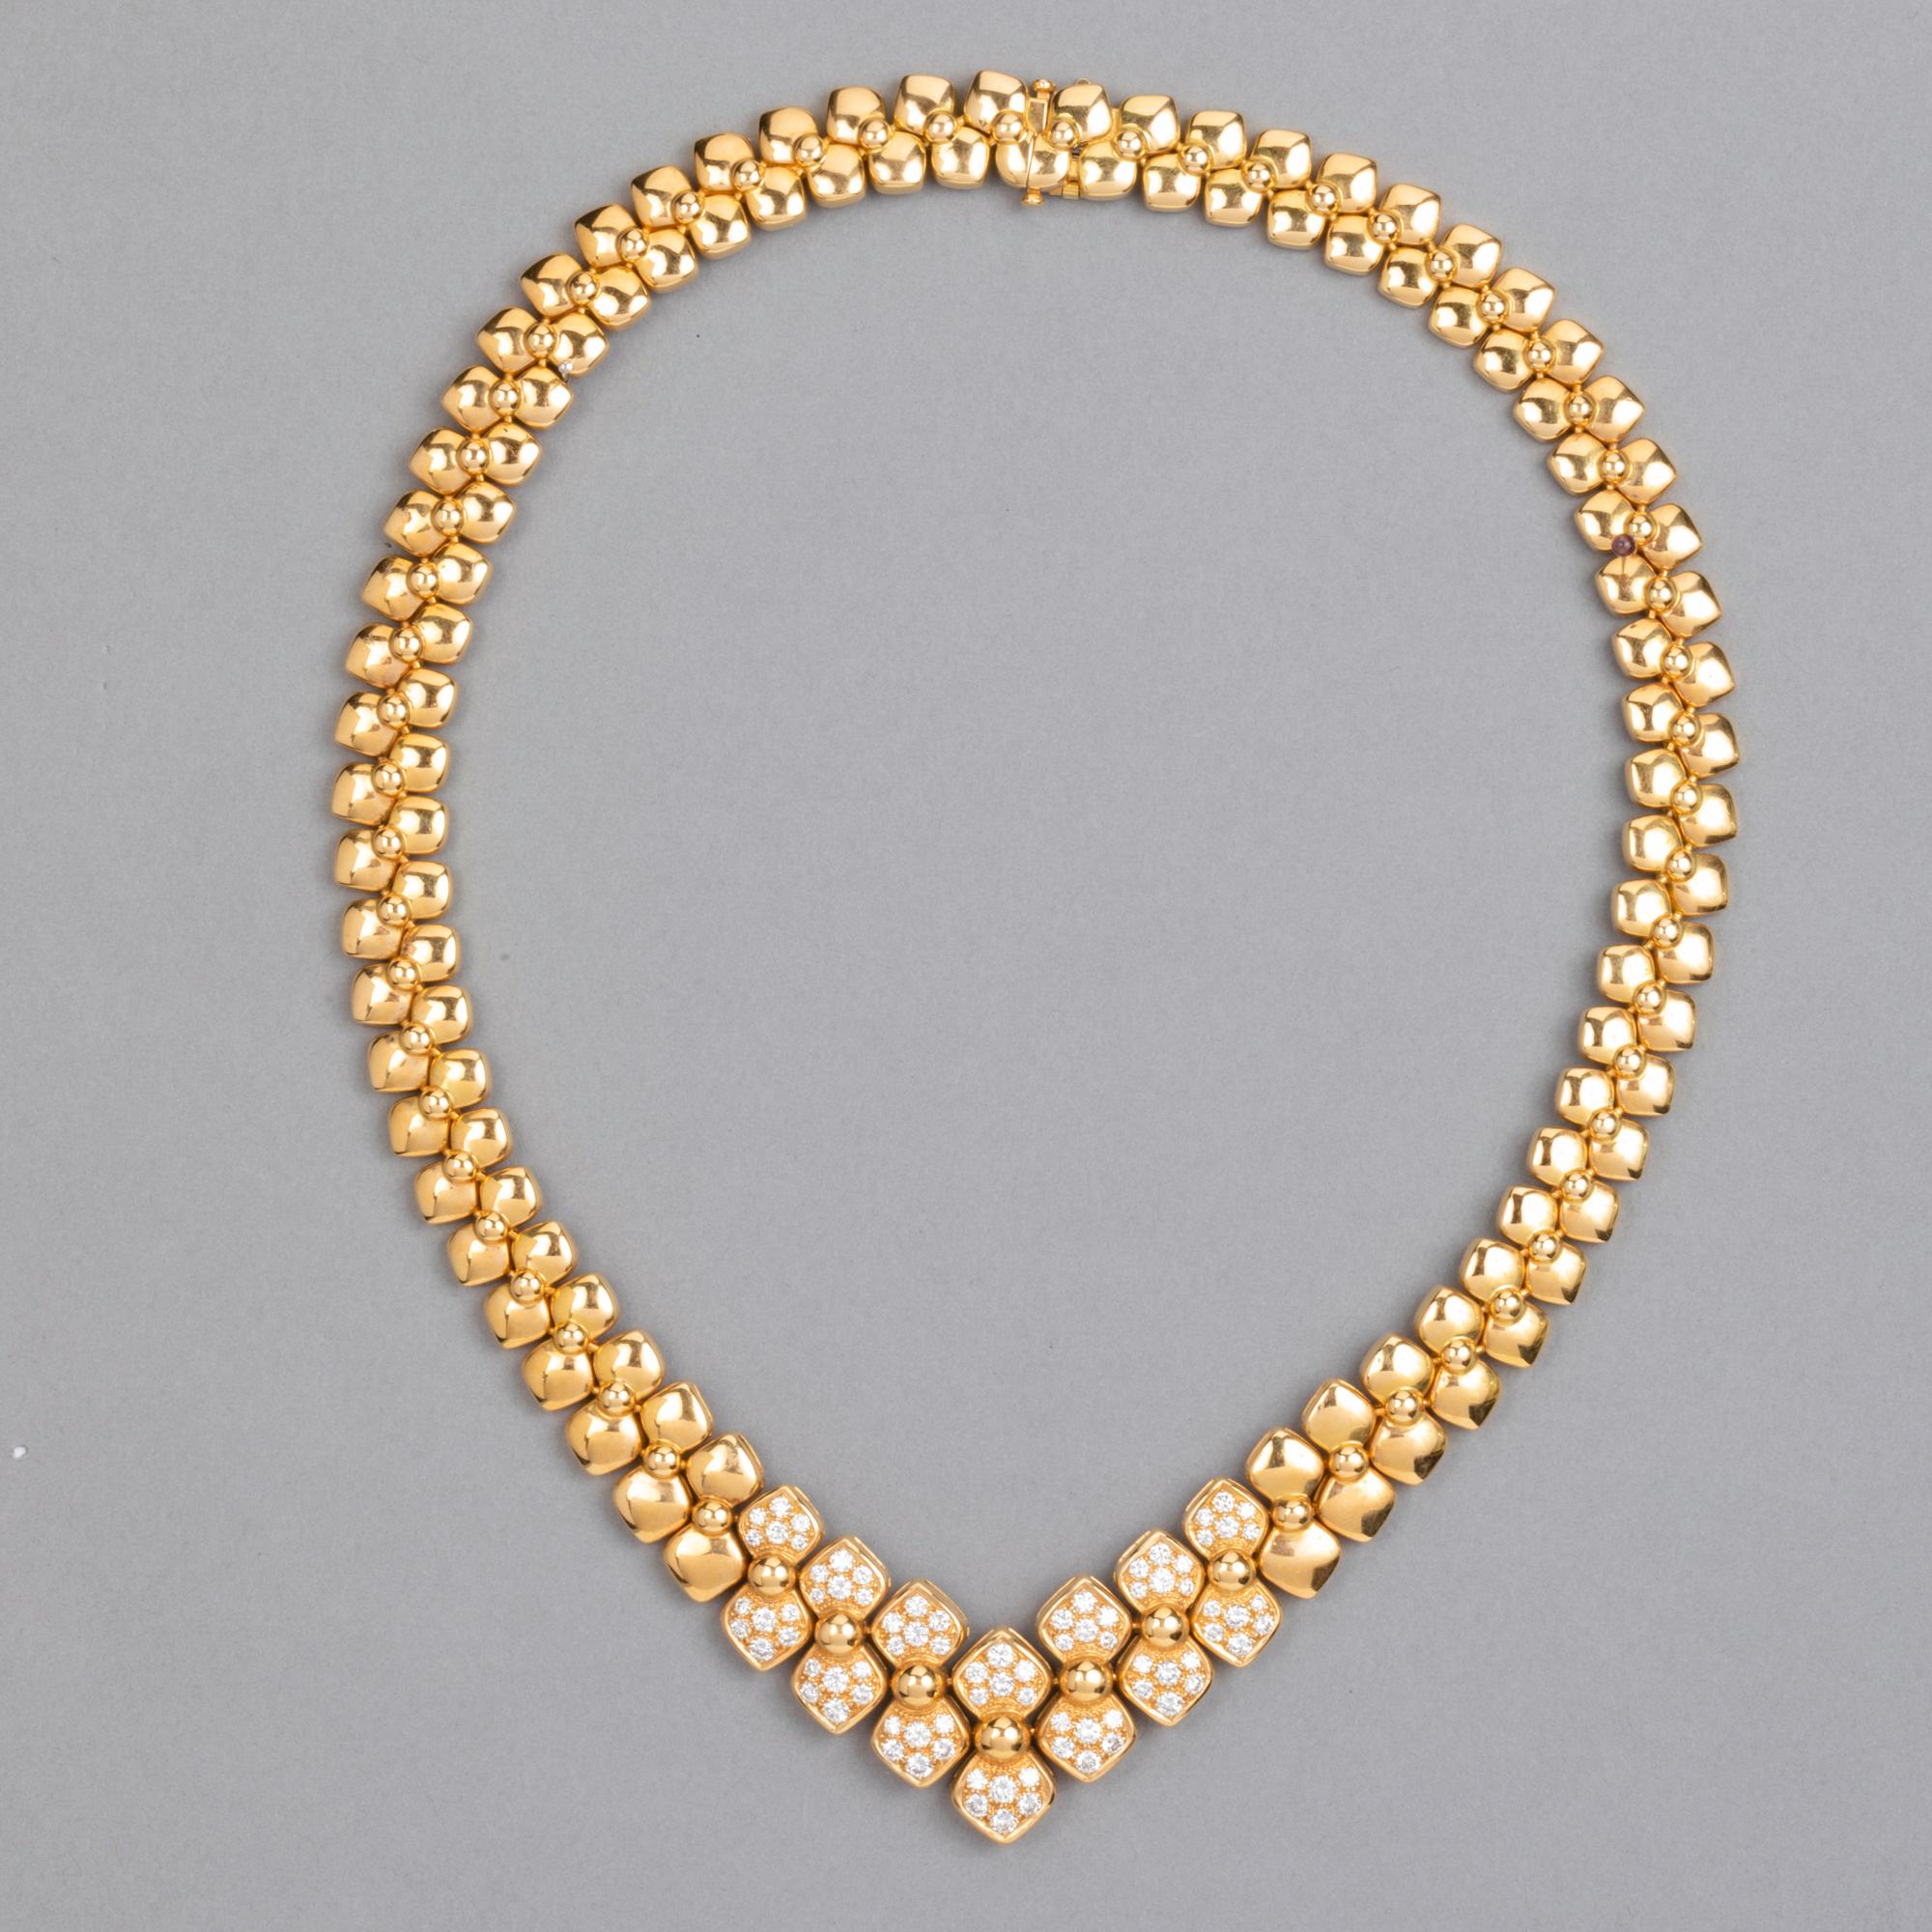 Very Beautiful Gold and diamonds necklace from Van Cleef & Arpels. 

This is a Rare Model, Made In France circa 1970. Propeller design for the chain.
The length is 41,5 cm and the weight is 116 gr. 
The necklace has 84 diamonds. 
The piece is signed